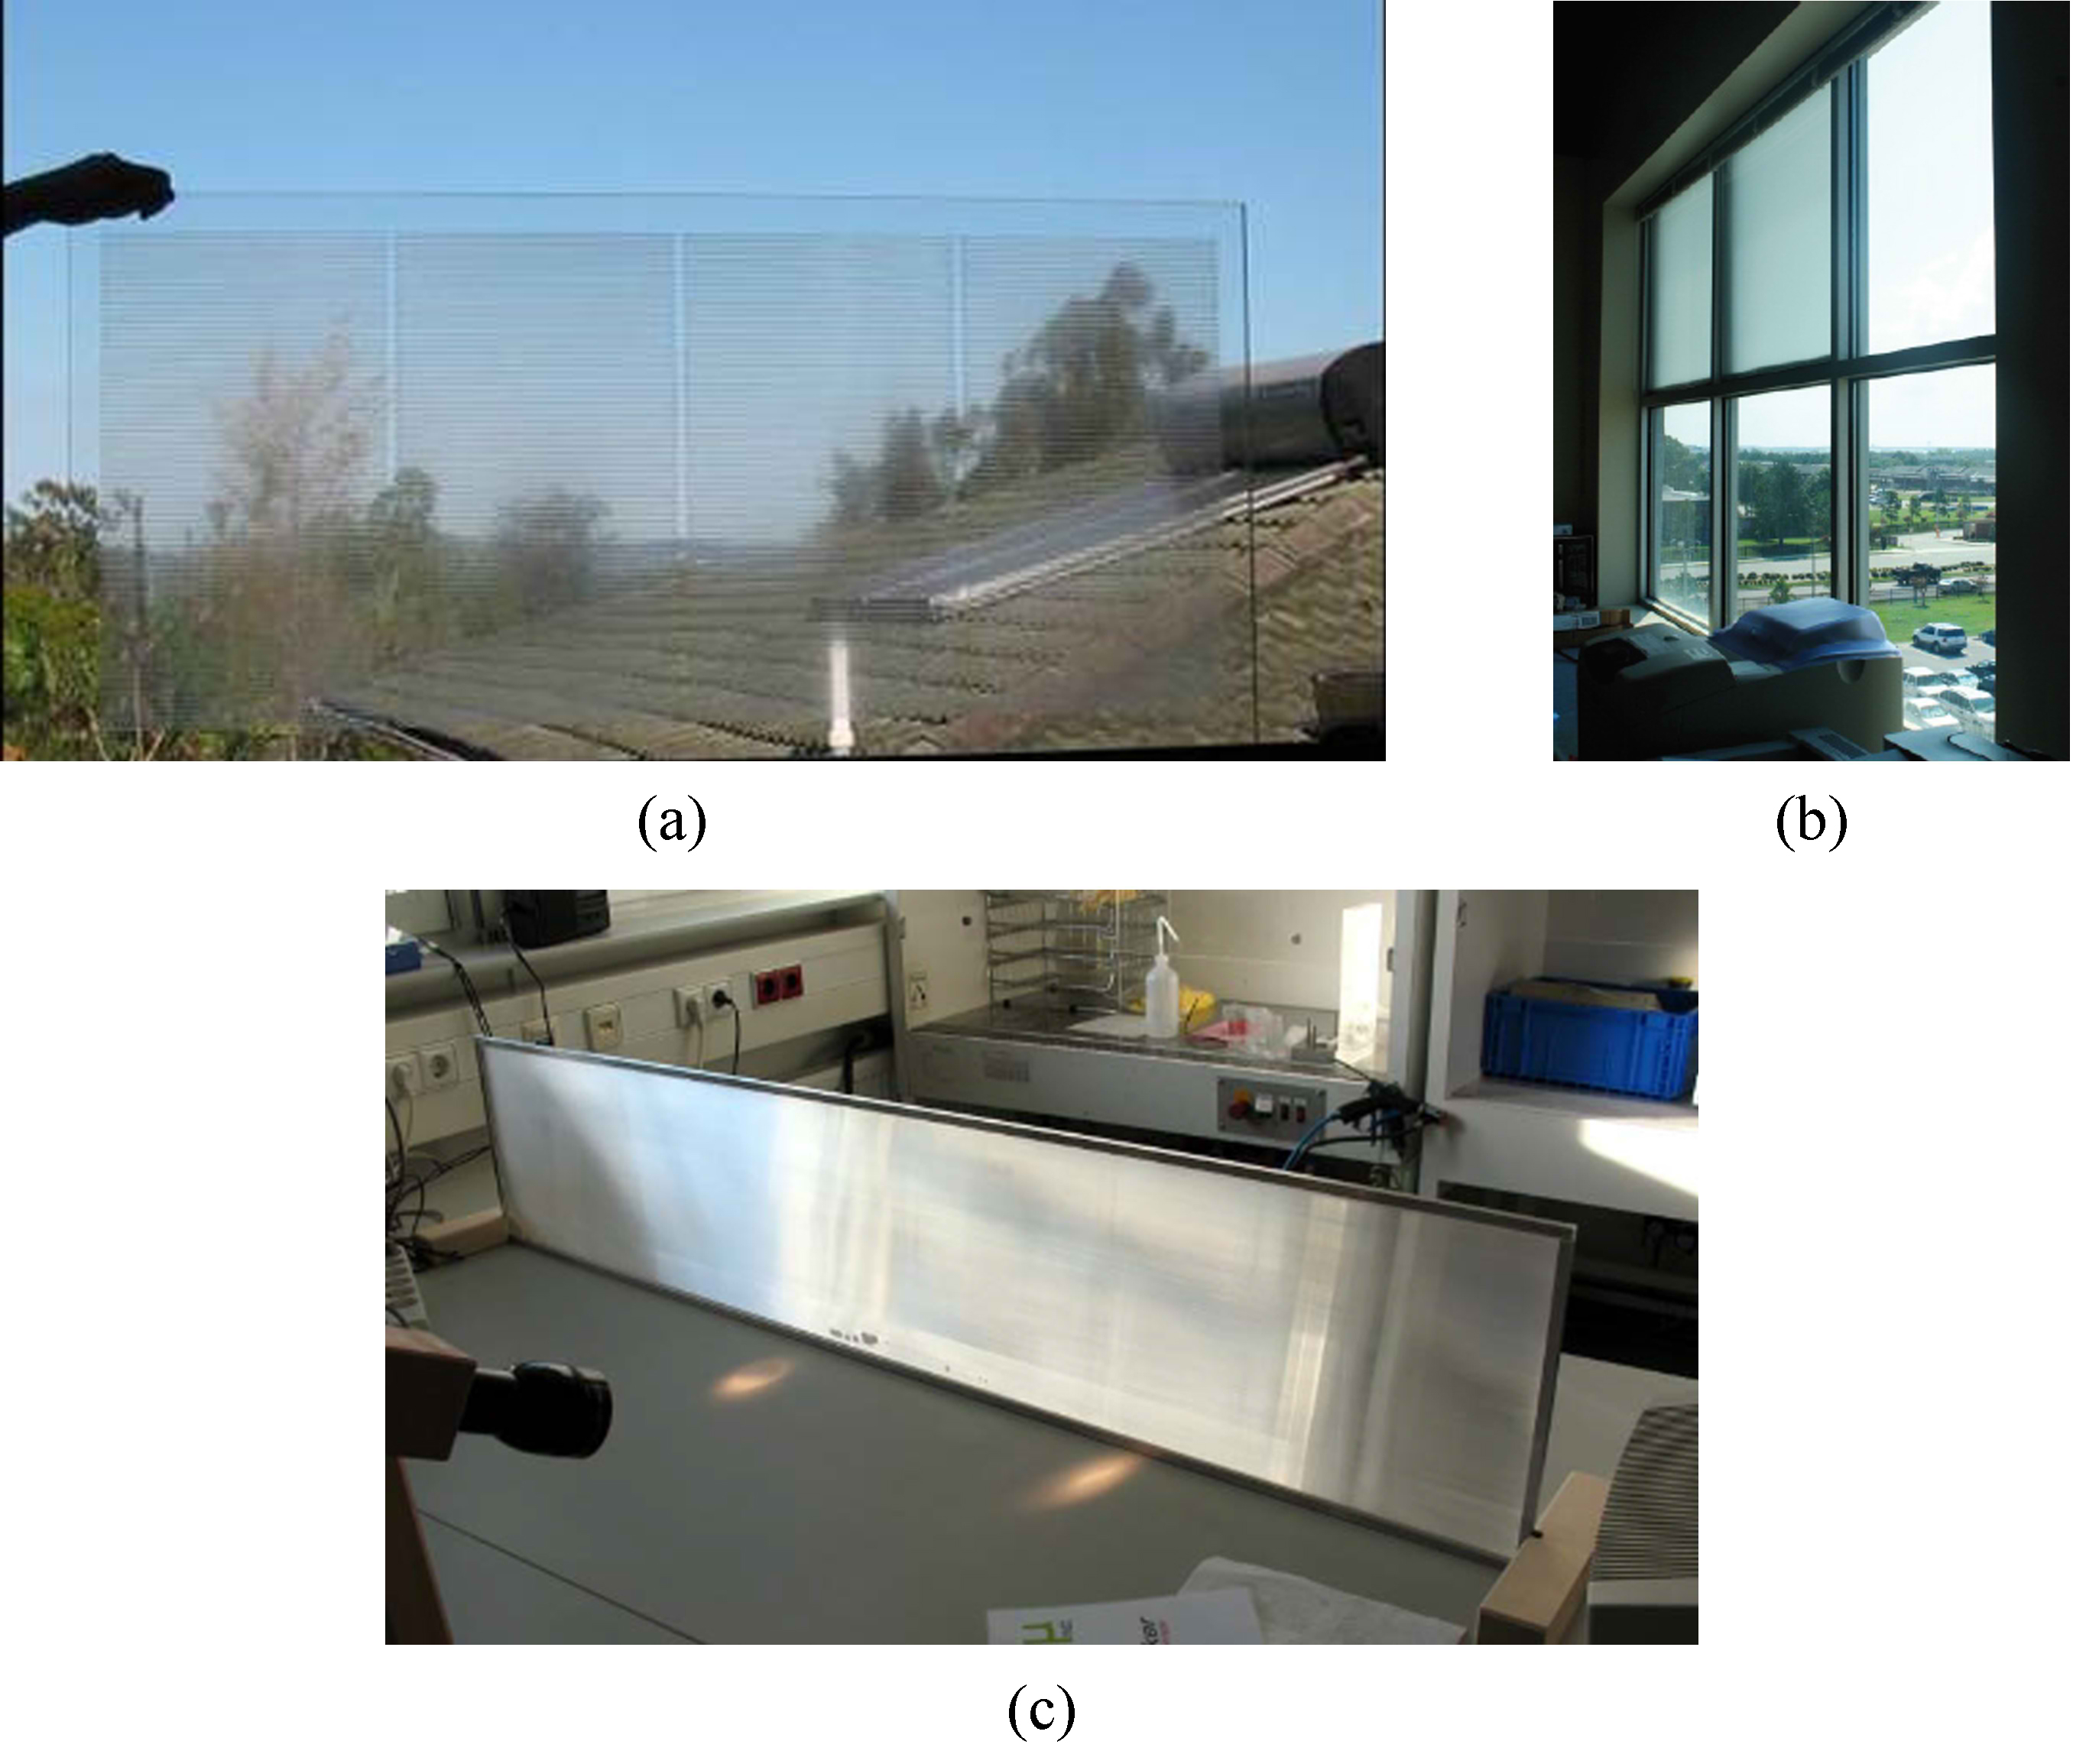 Views of the investigated CFS: (a) LCP, (b) microstructure light redirecting film (3MTM film), (c) a sample of one of the three versions of the microstructure daylighting system (CFS1, CFS2, and CFS3).